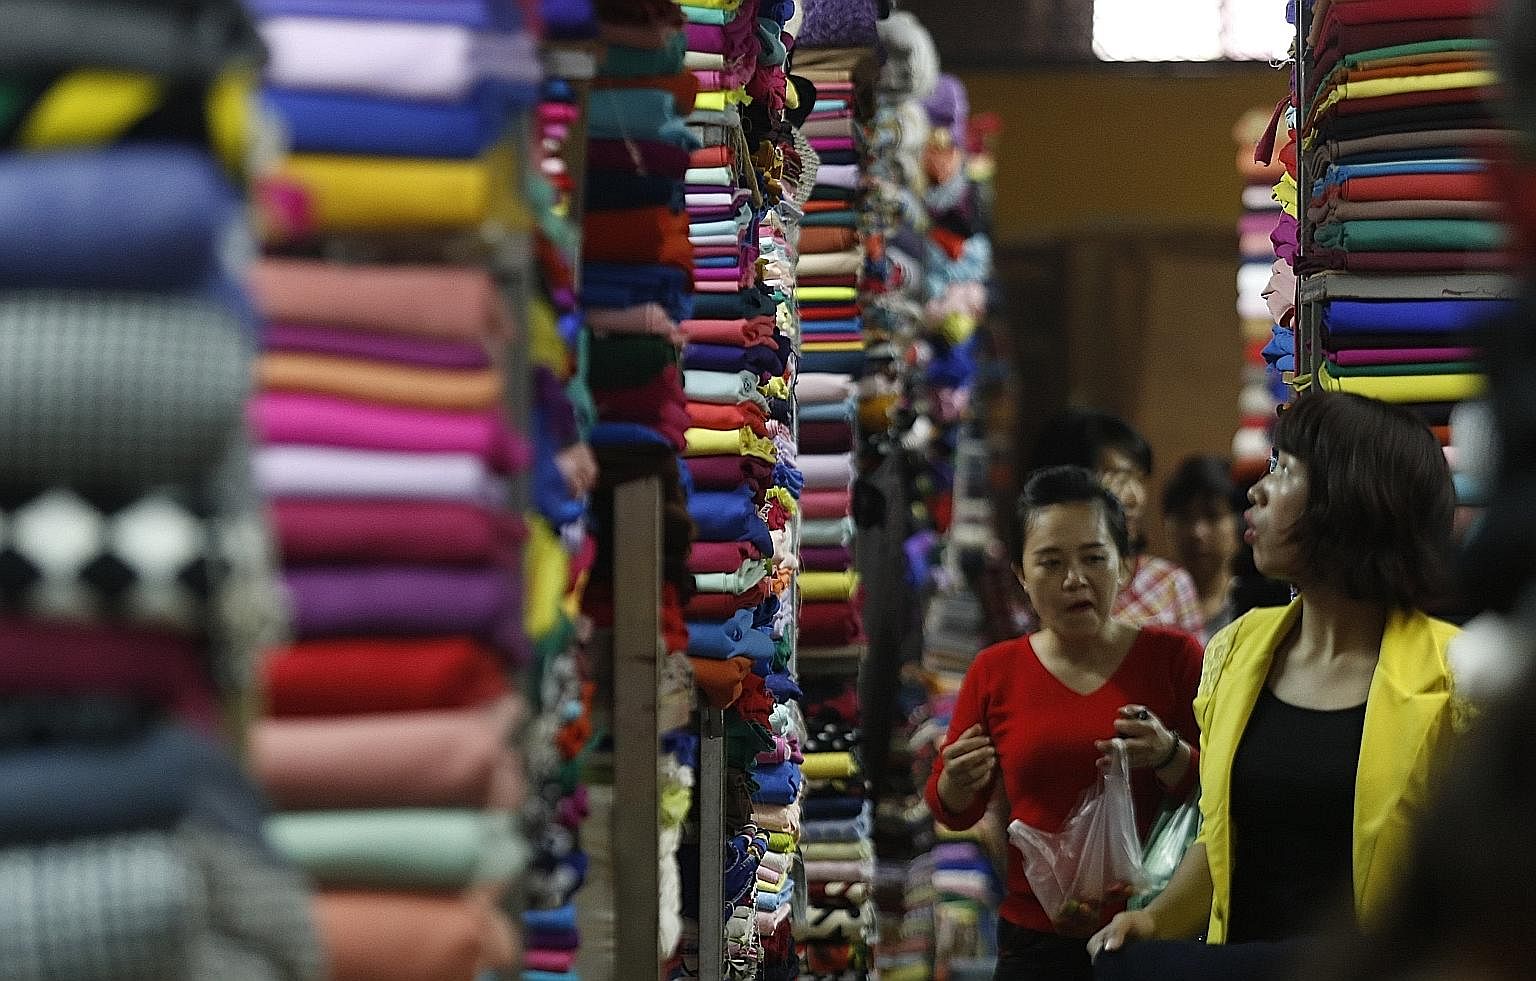 Customers walking among rows of fabric on display at a market in Hanoi. Despite Vietnam's tremendous progress, the nation remains in a fragile state with one-third of its 30 million people being vulnerable to falling back into poverty.